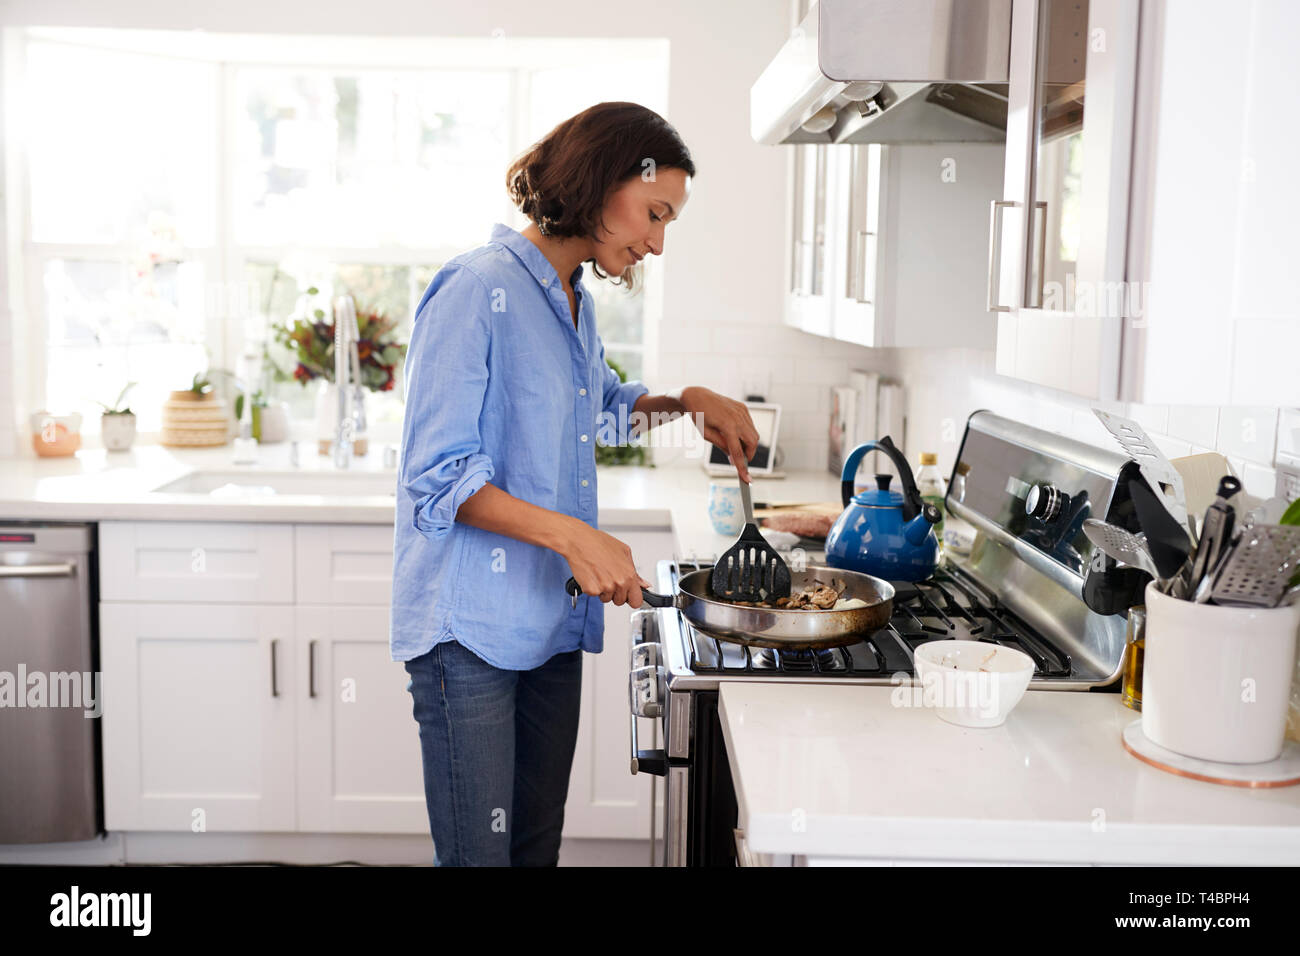 Young adult woman standing at hob in the kitchen cooking food using a spatula and frying pan, side view Stock Photo